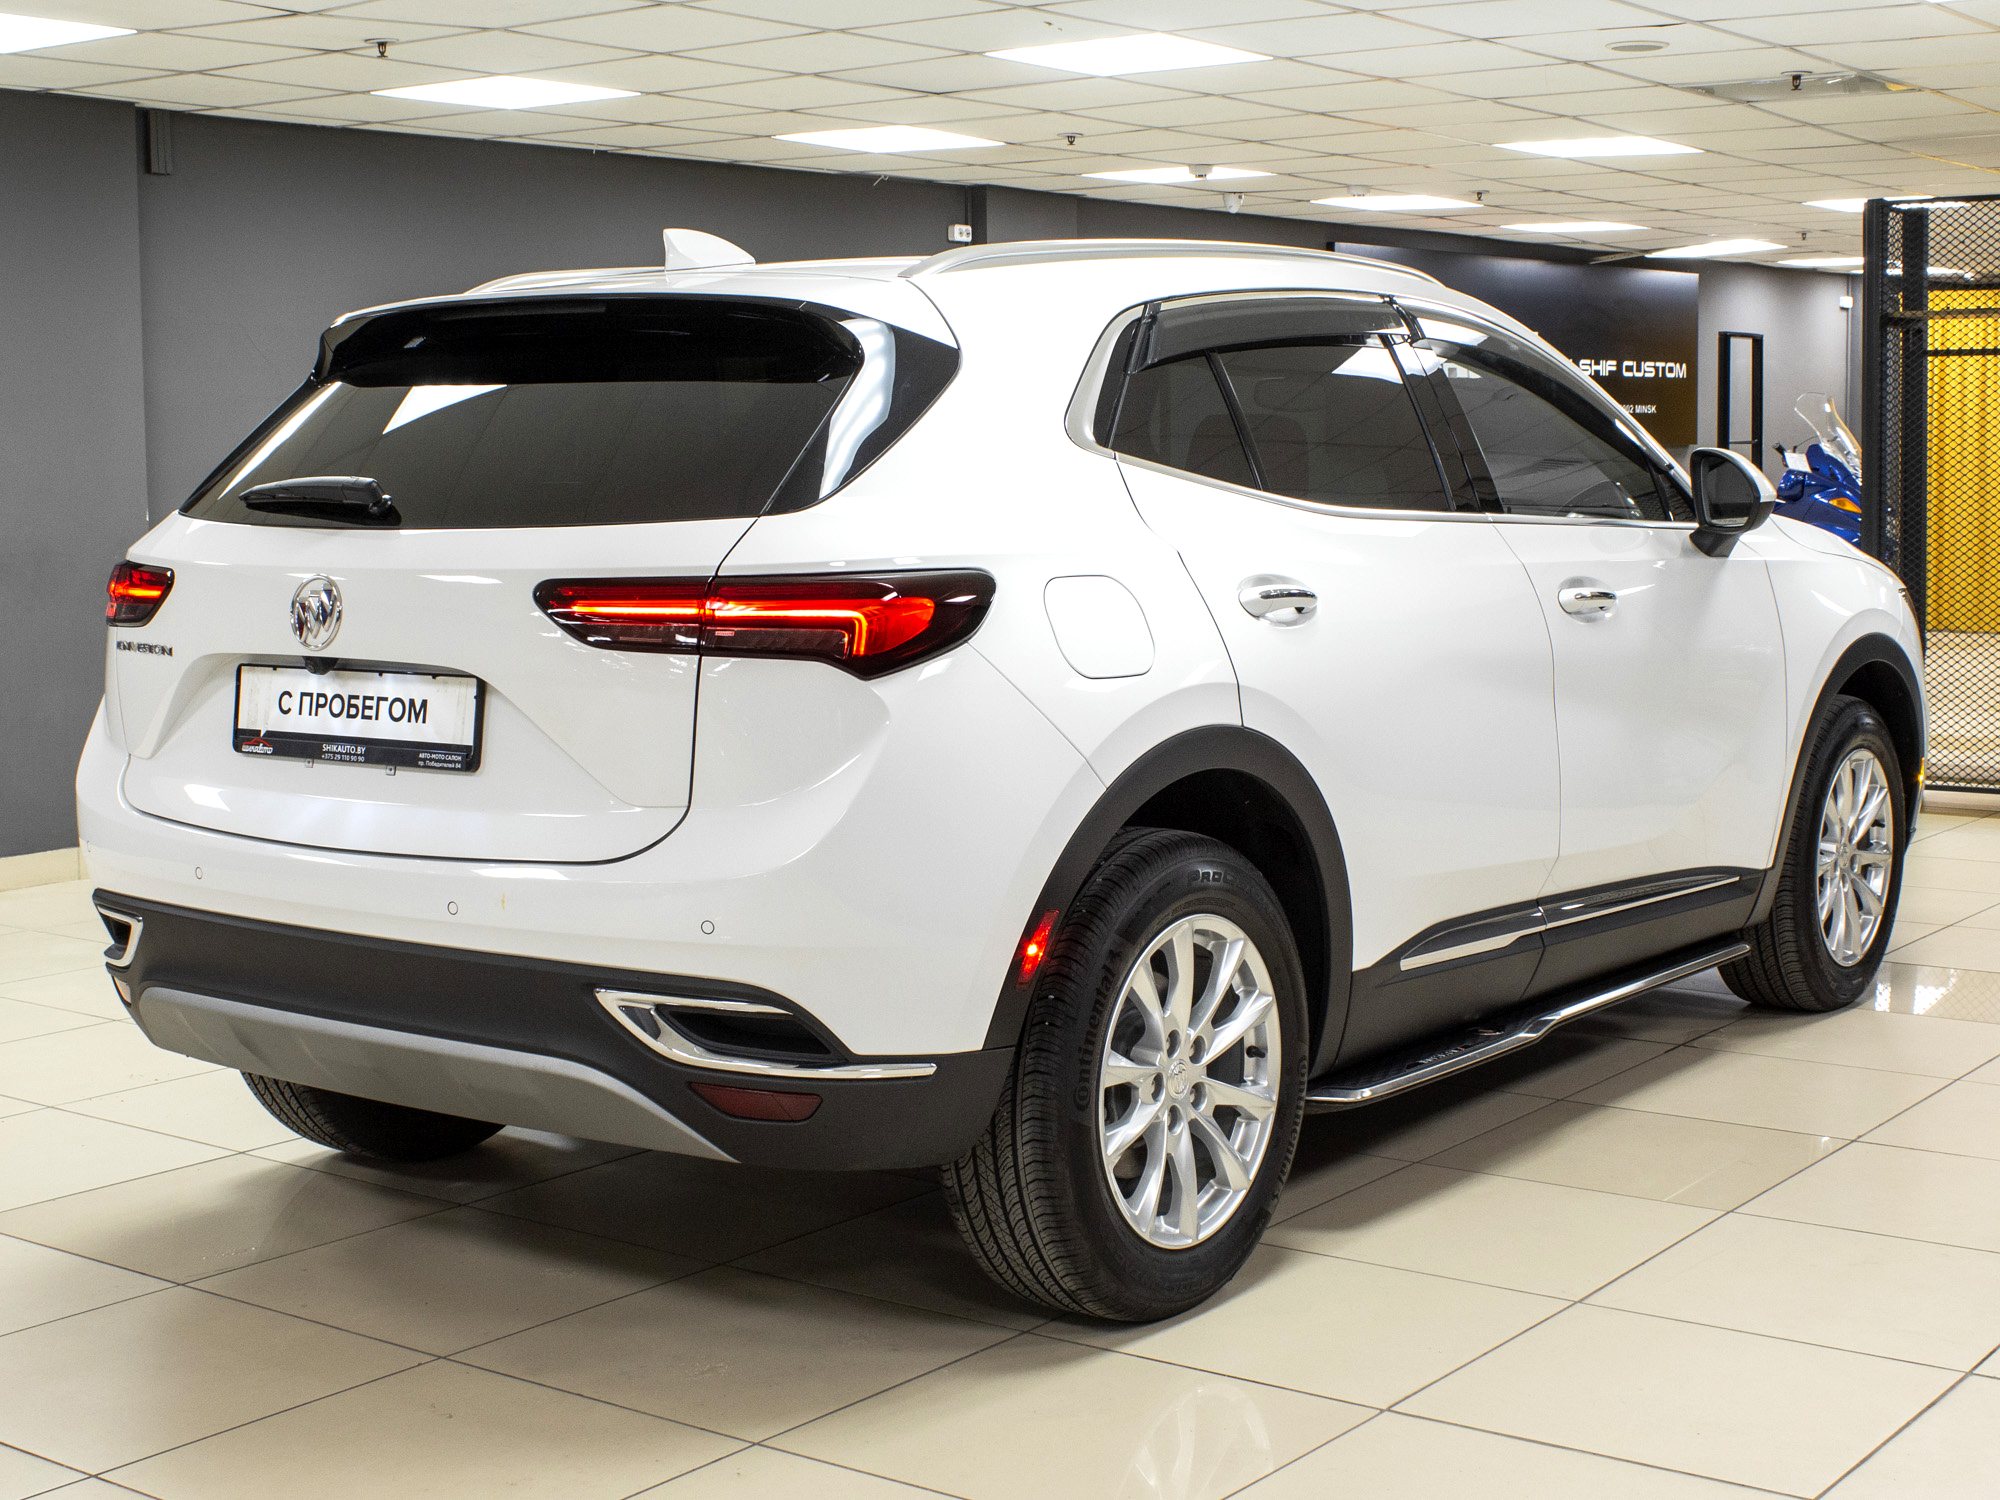 Buick Envision 